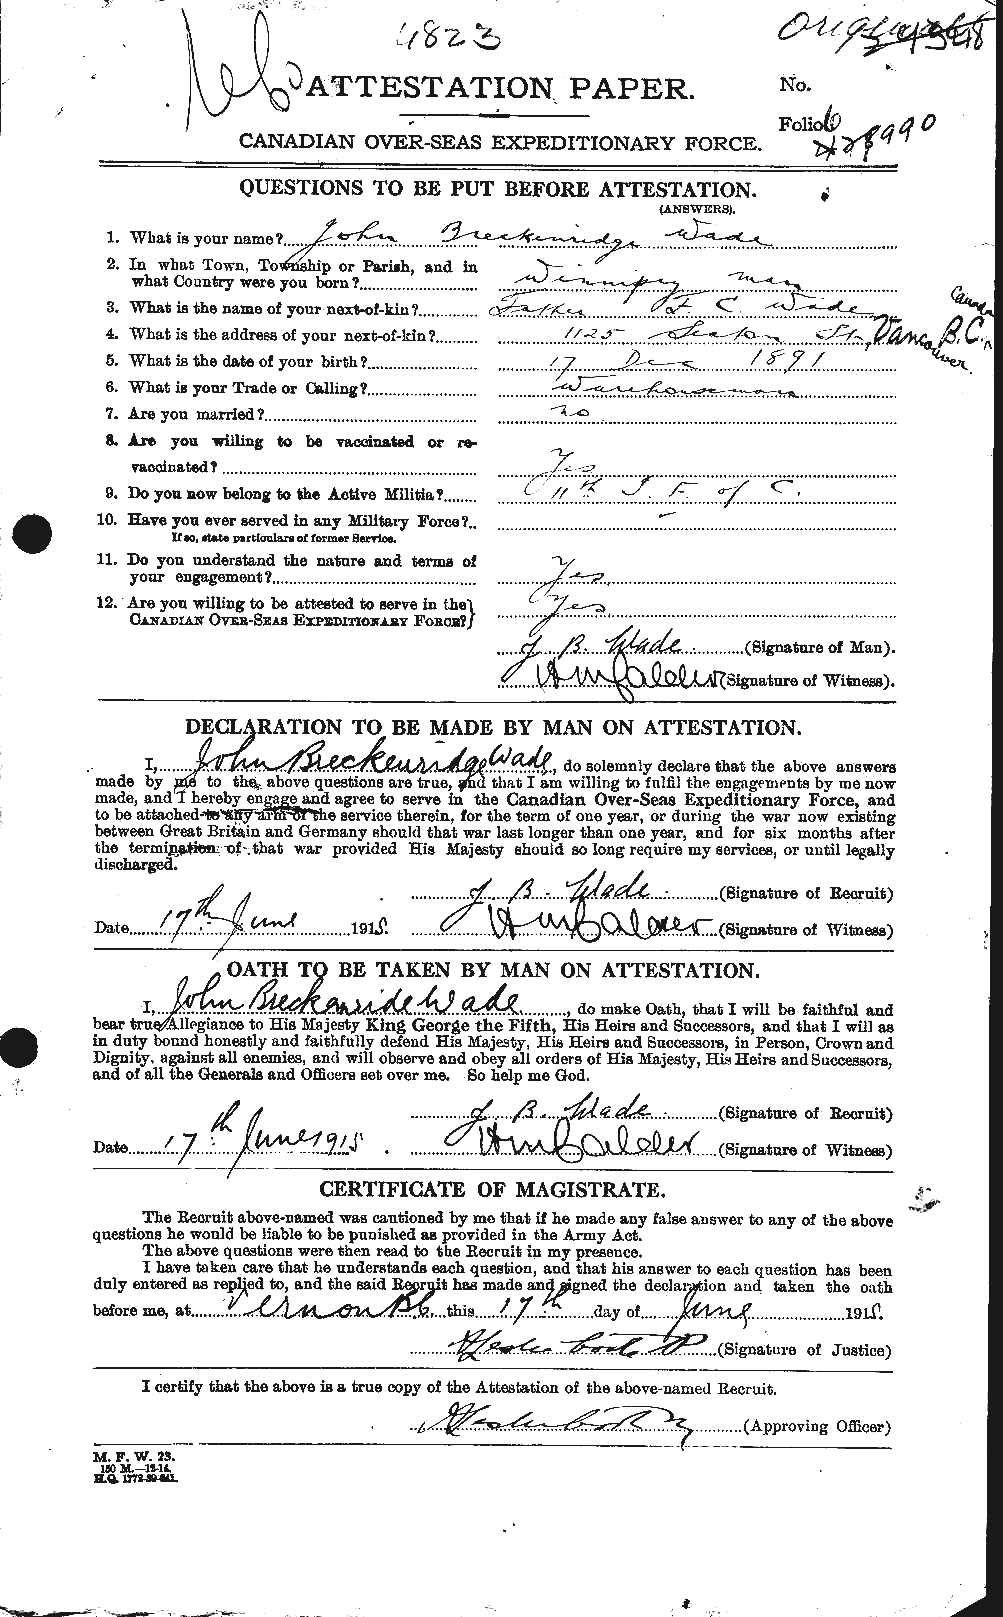 Personnel Records of the First World War - CEF 651264a